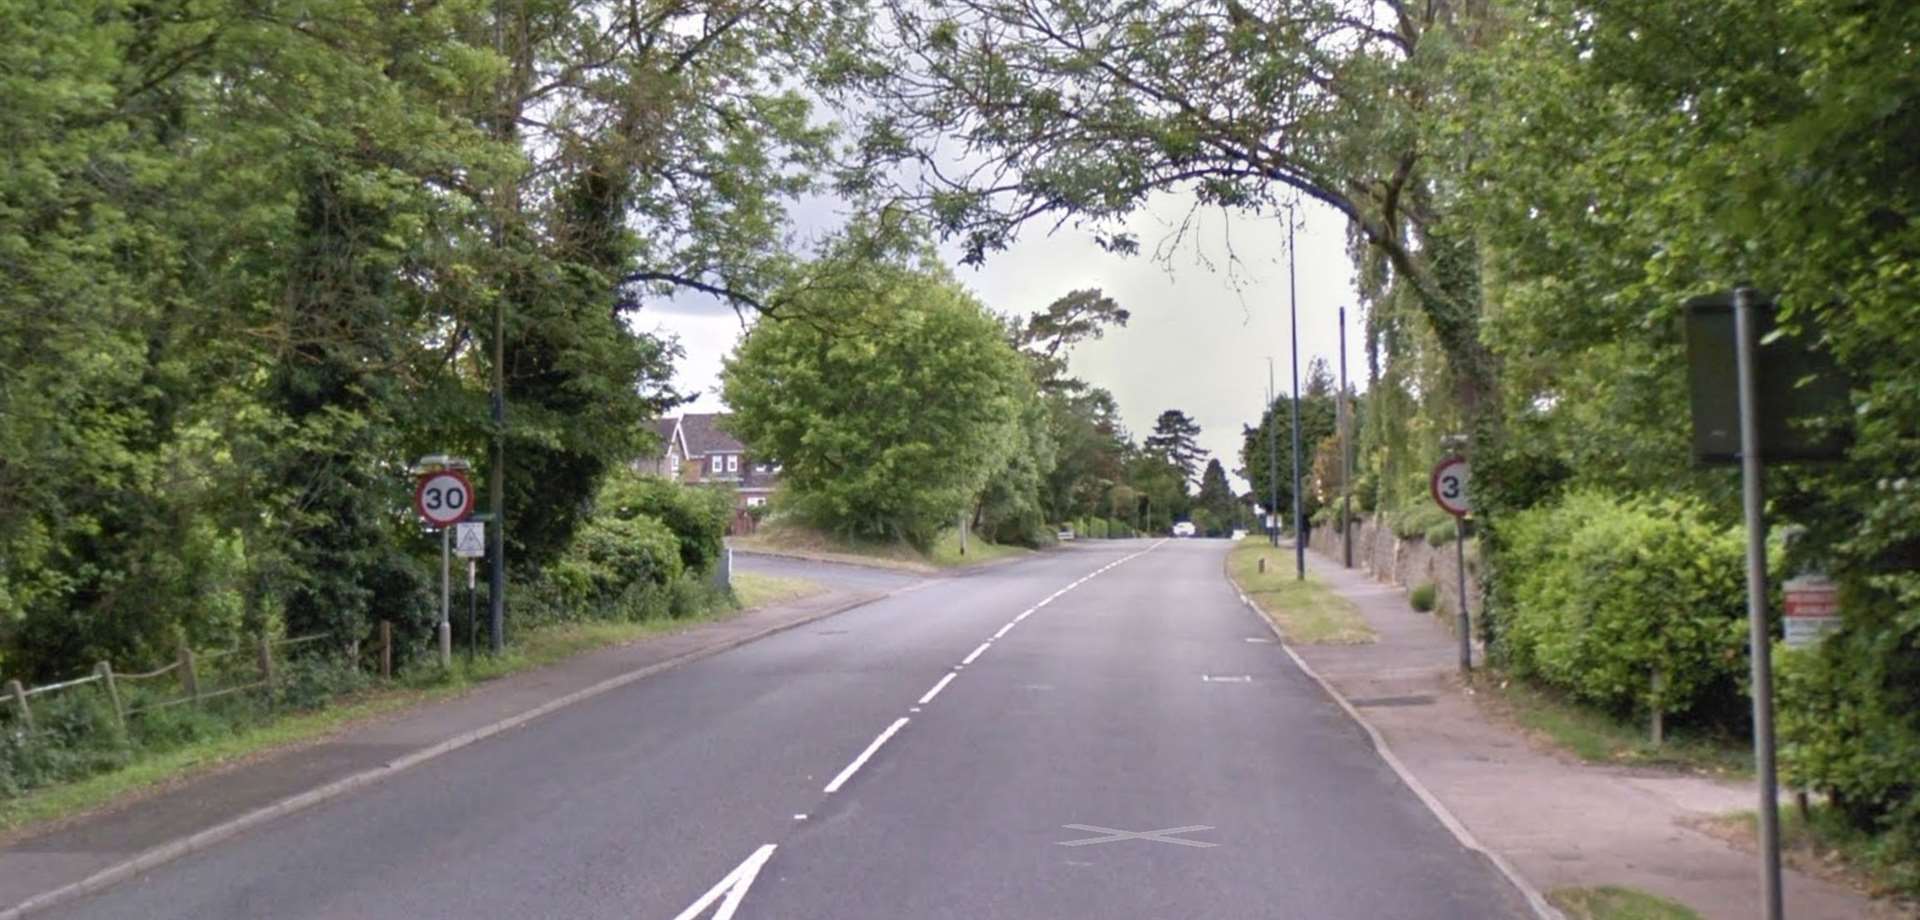 Daniels was stopped by police on the A20 at Bearsted. Picture: Google Street View